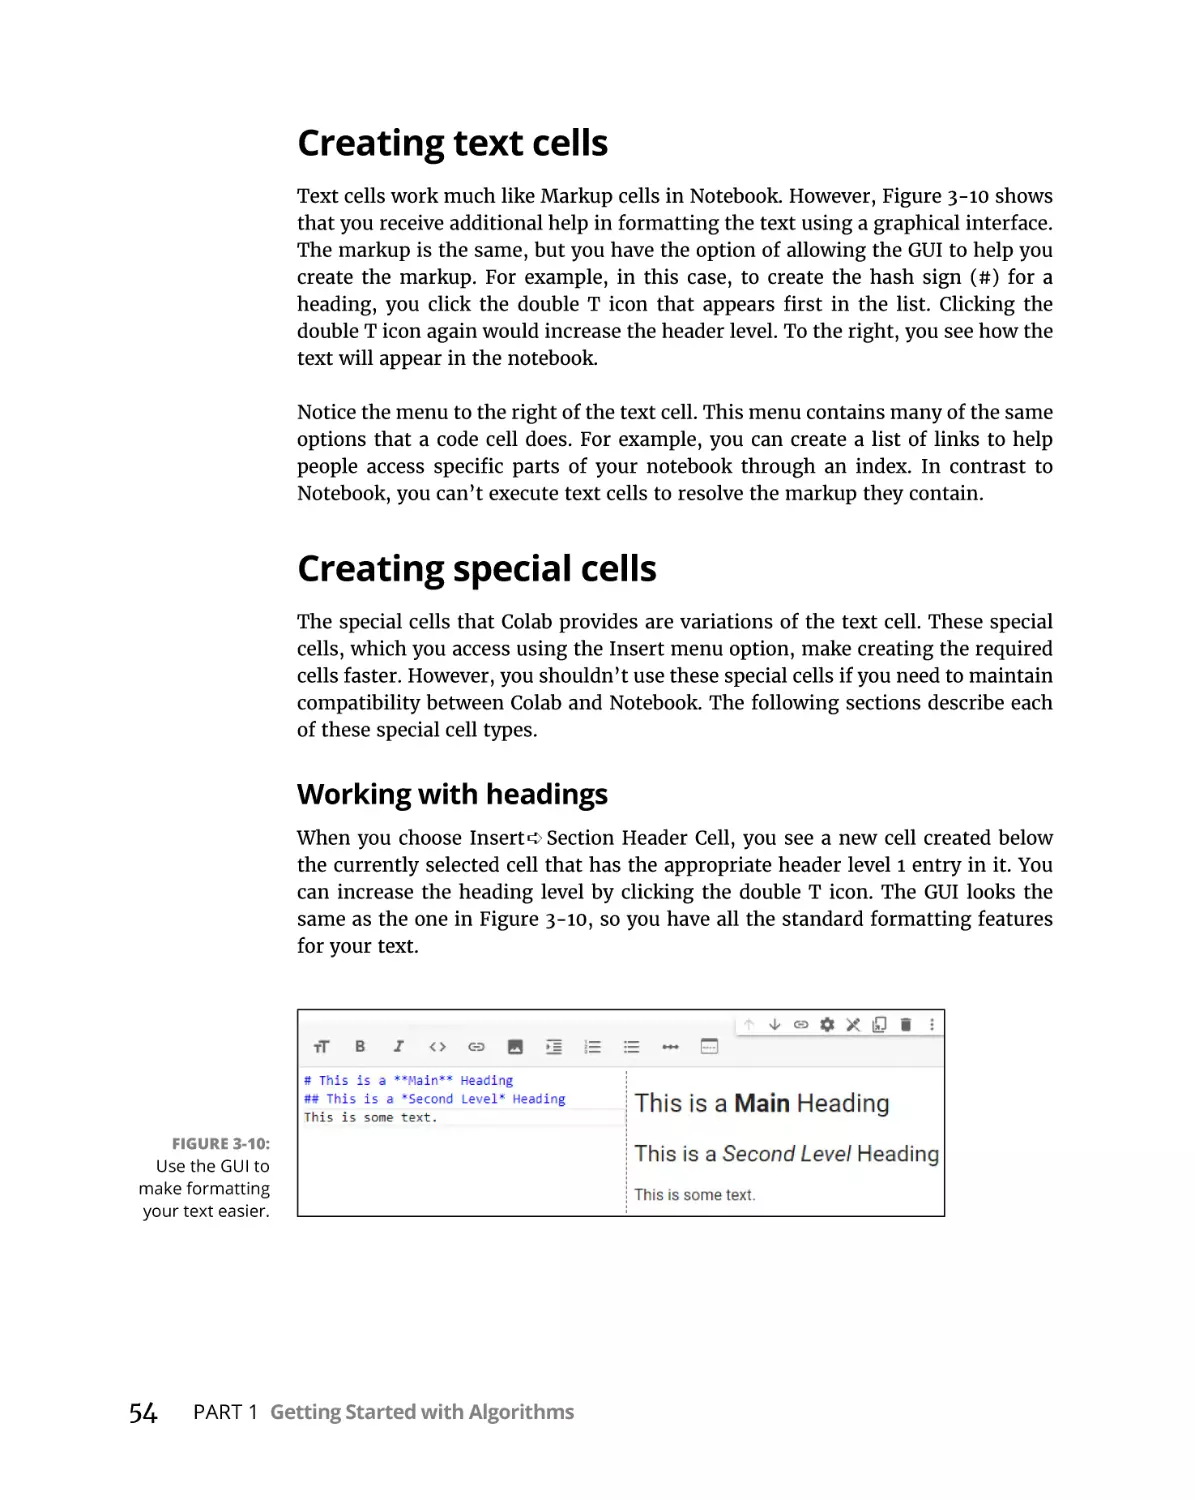 Creating text cells
Creating special cells